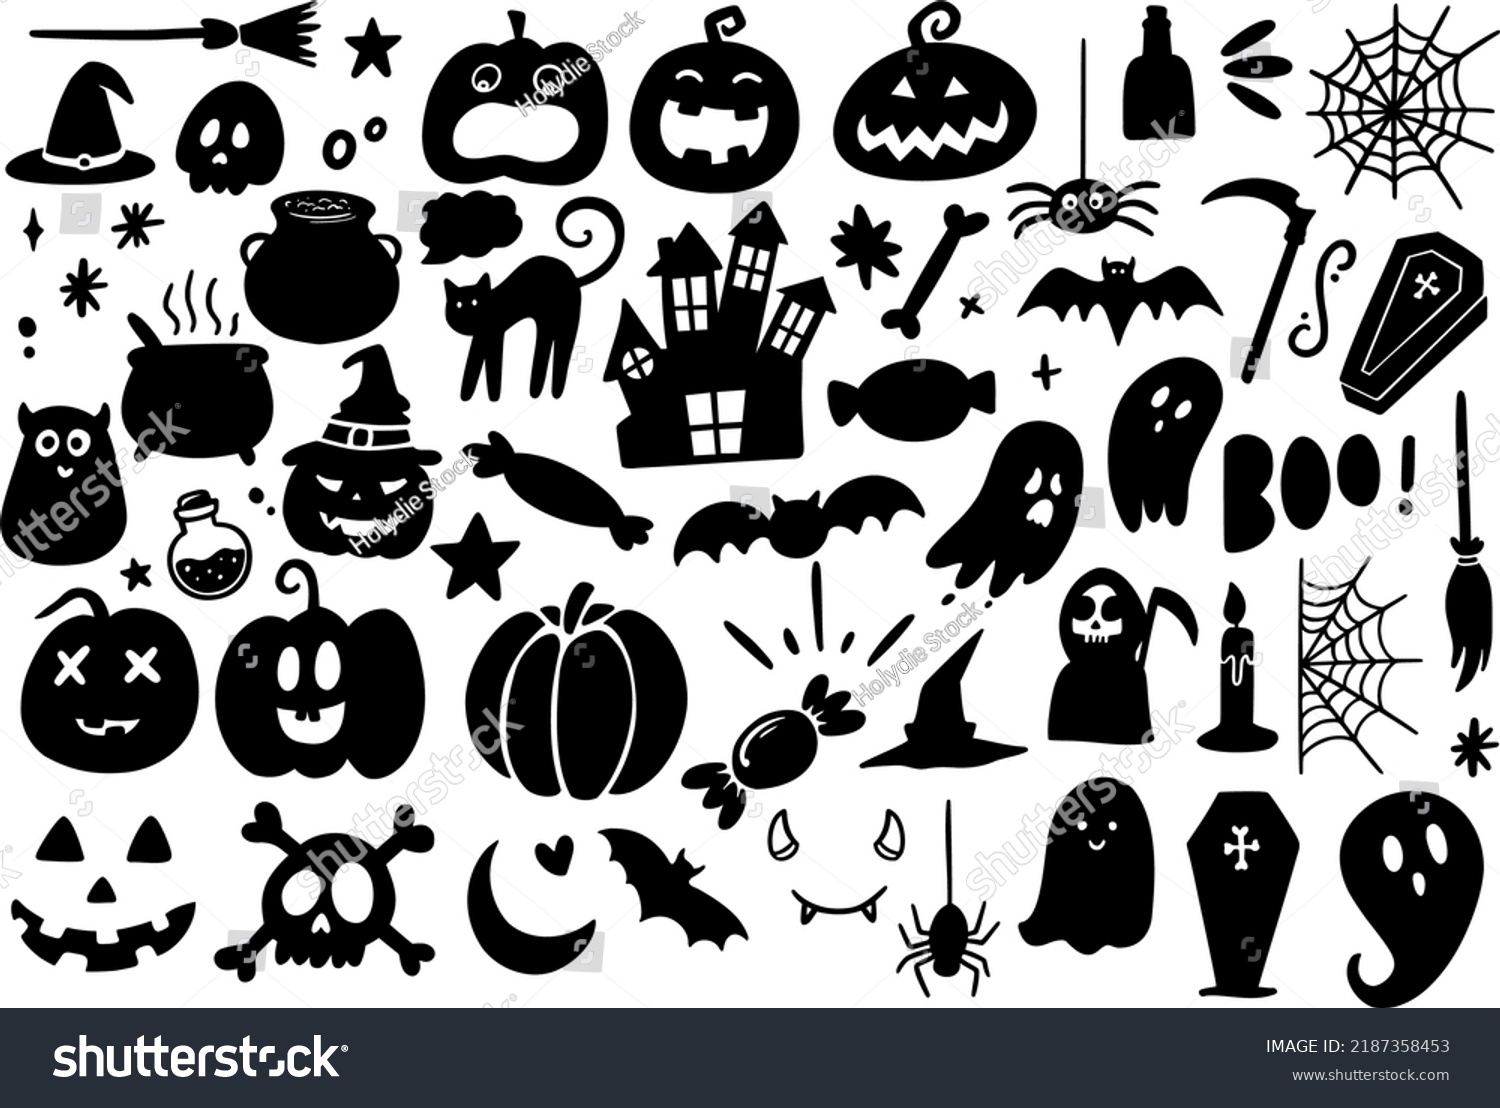 SVG of Hand drawing Halloween Doodle vector graphic design illustration. Great design for book cover, postcard, cut file, t shirt print or poster. svg